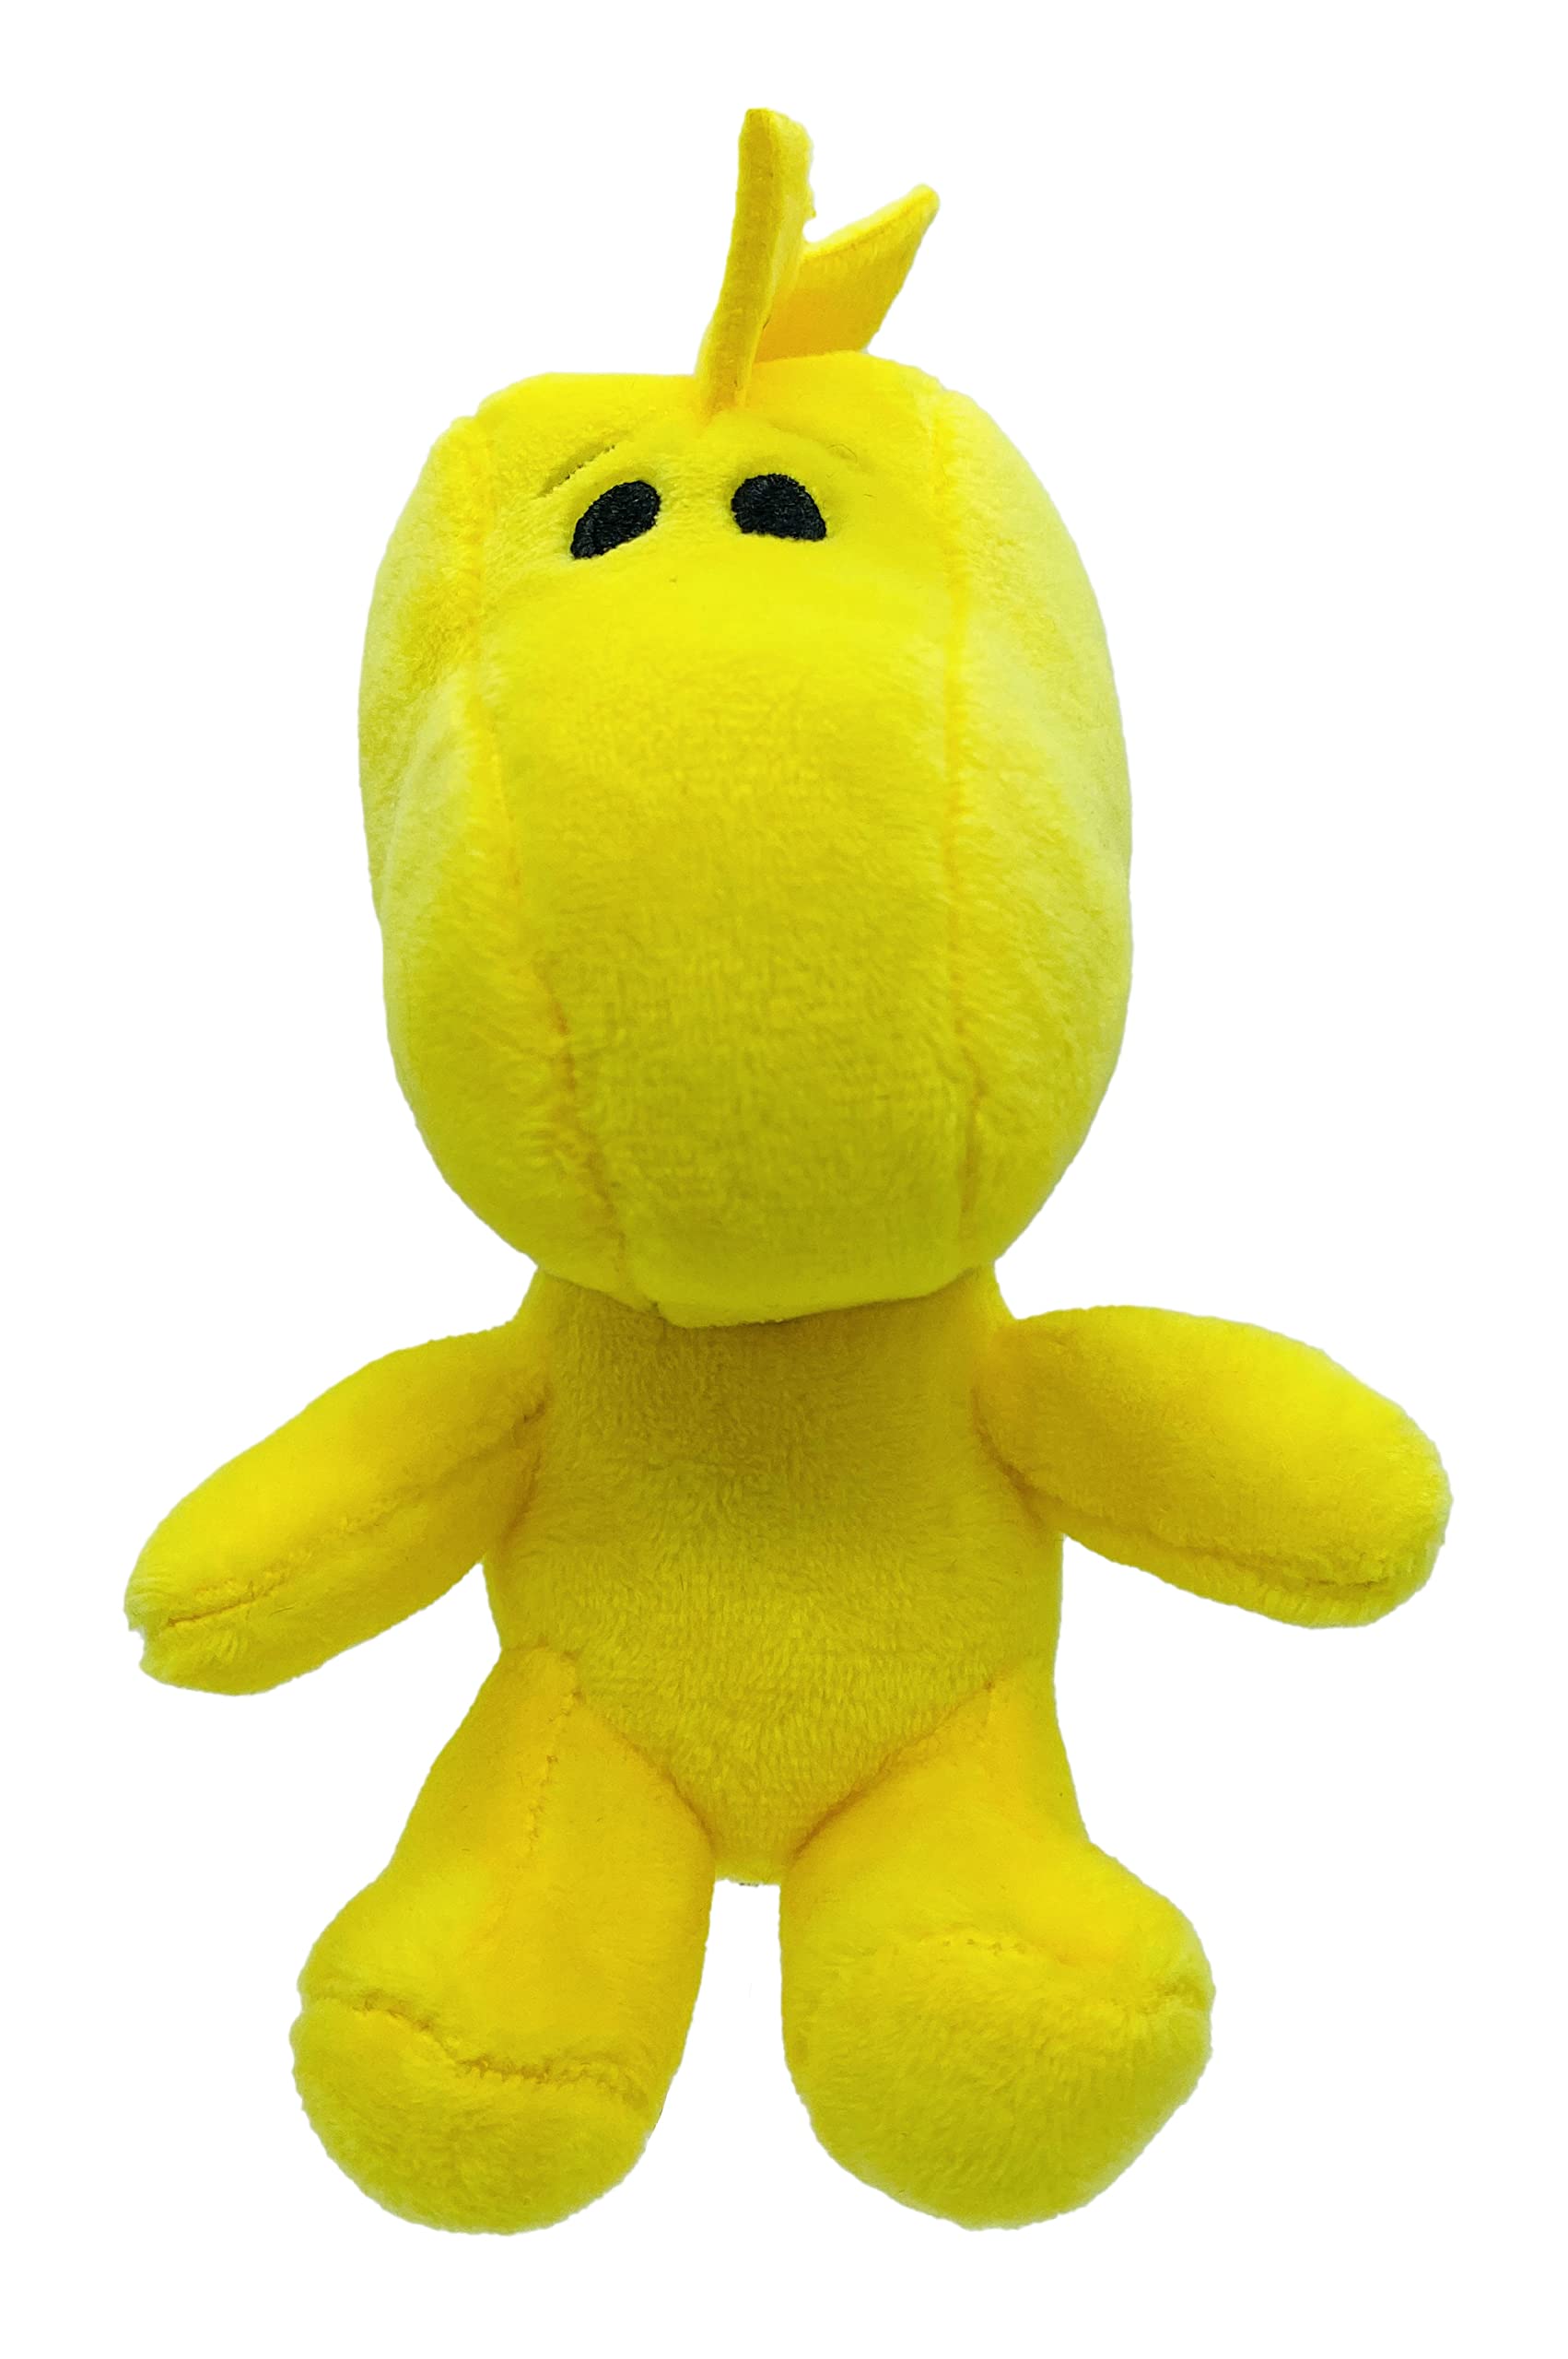 JINX Official Peanuts Collectible Plush Woodstock, Excellent Plushie Toy for Toddlers & Preschool, Super Cute Snoopy Team